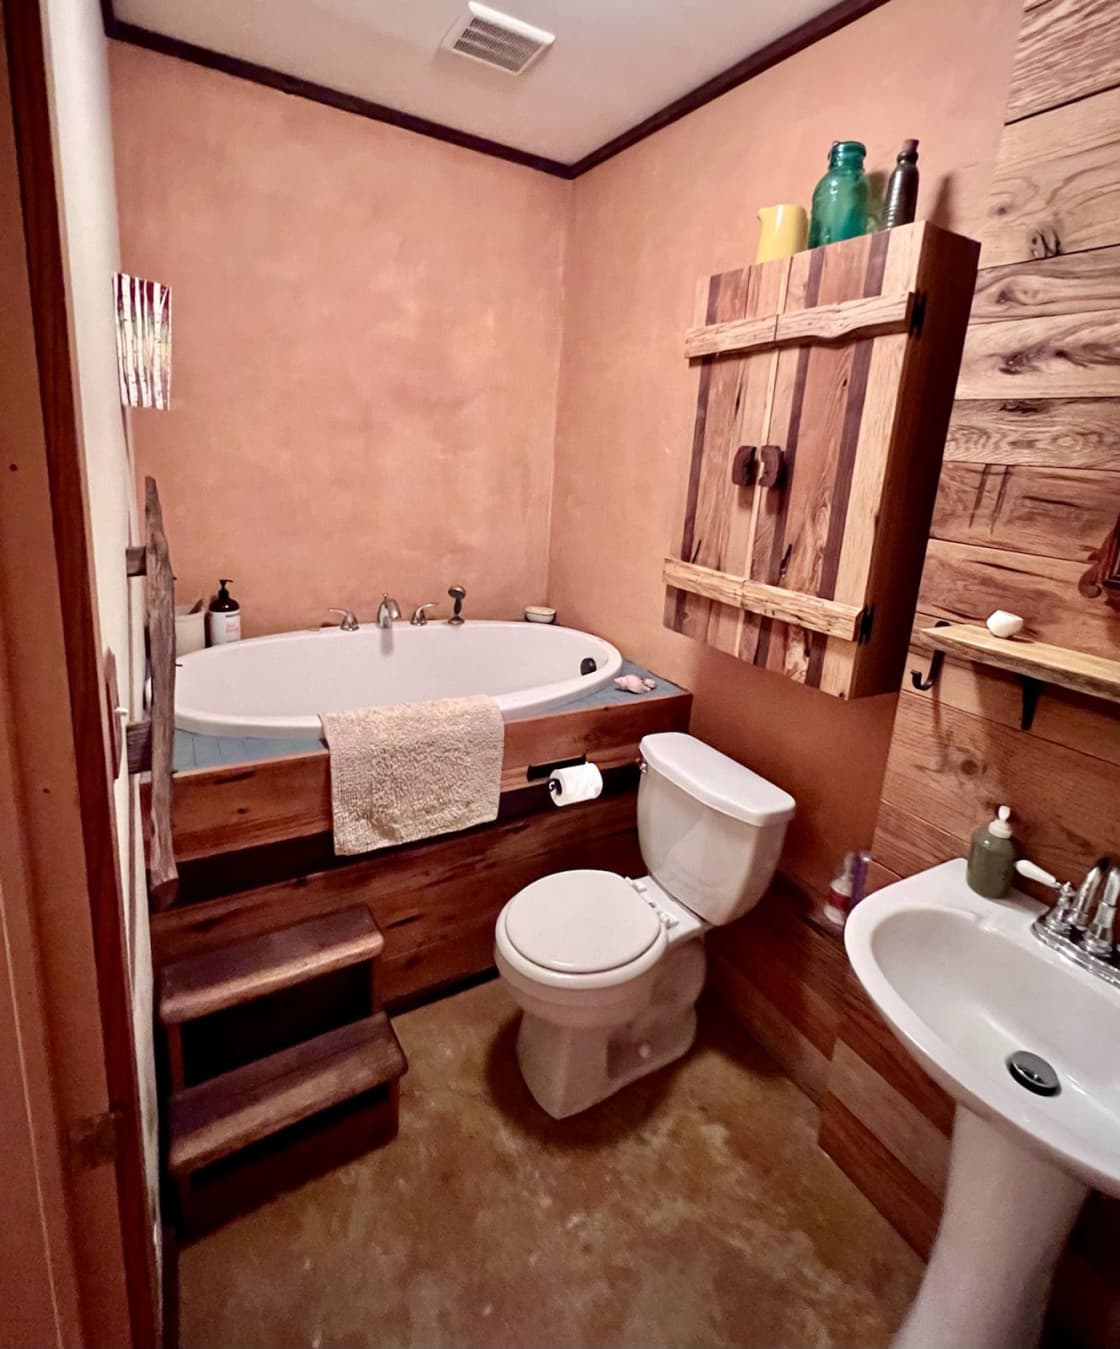 Attached bathroom to main bedroom with a jetted tub